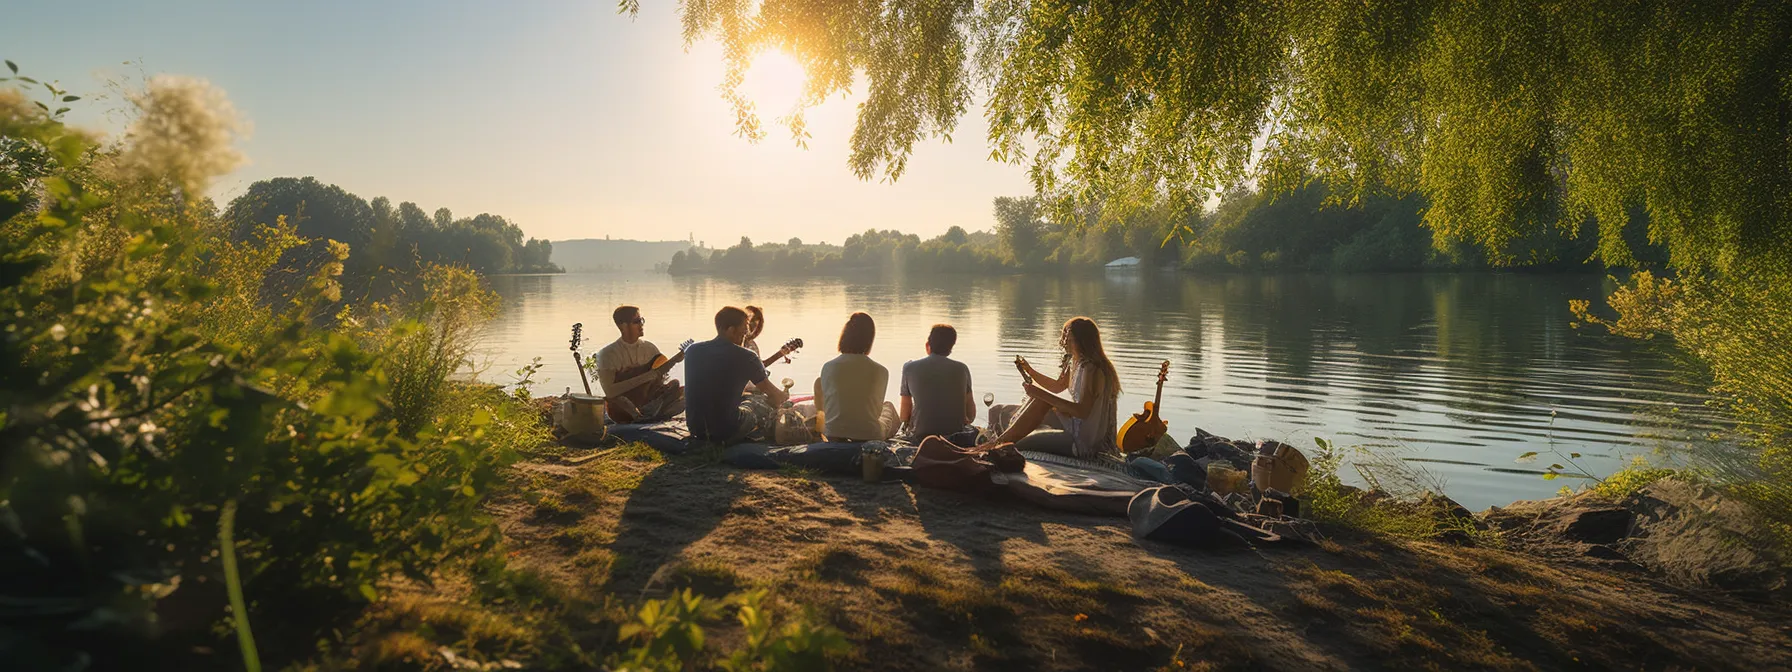 a group of friends enjoys a picnic by a serene lake surrounded by lush greenery.